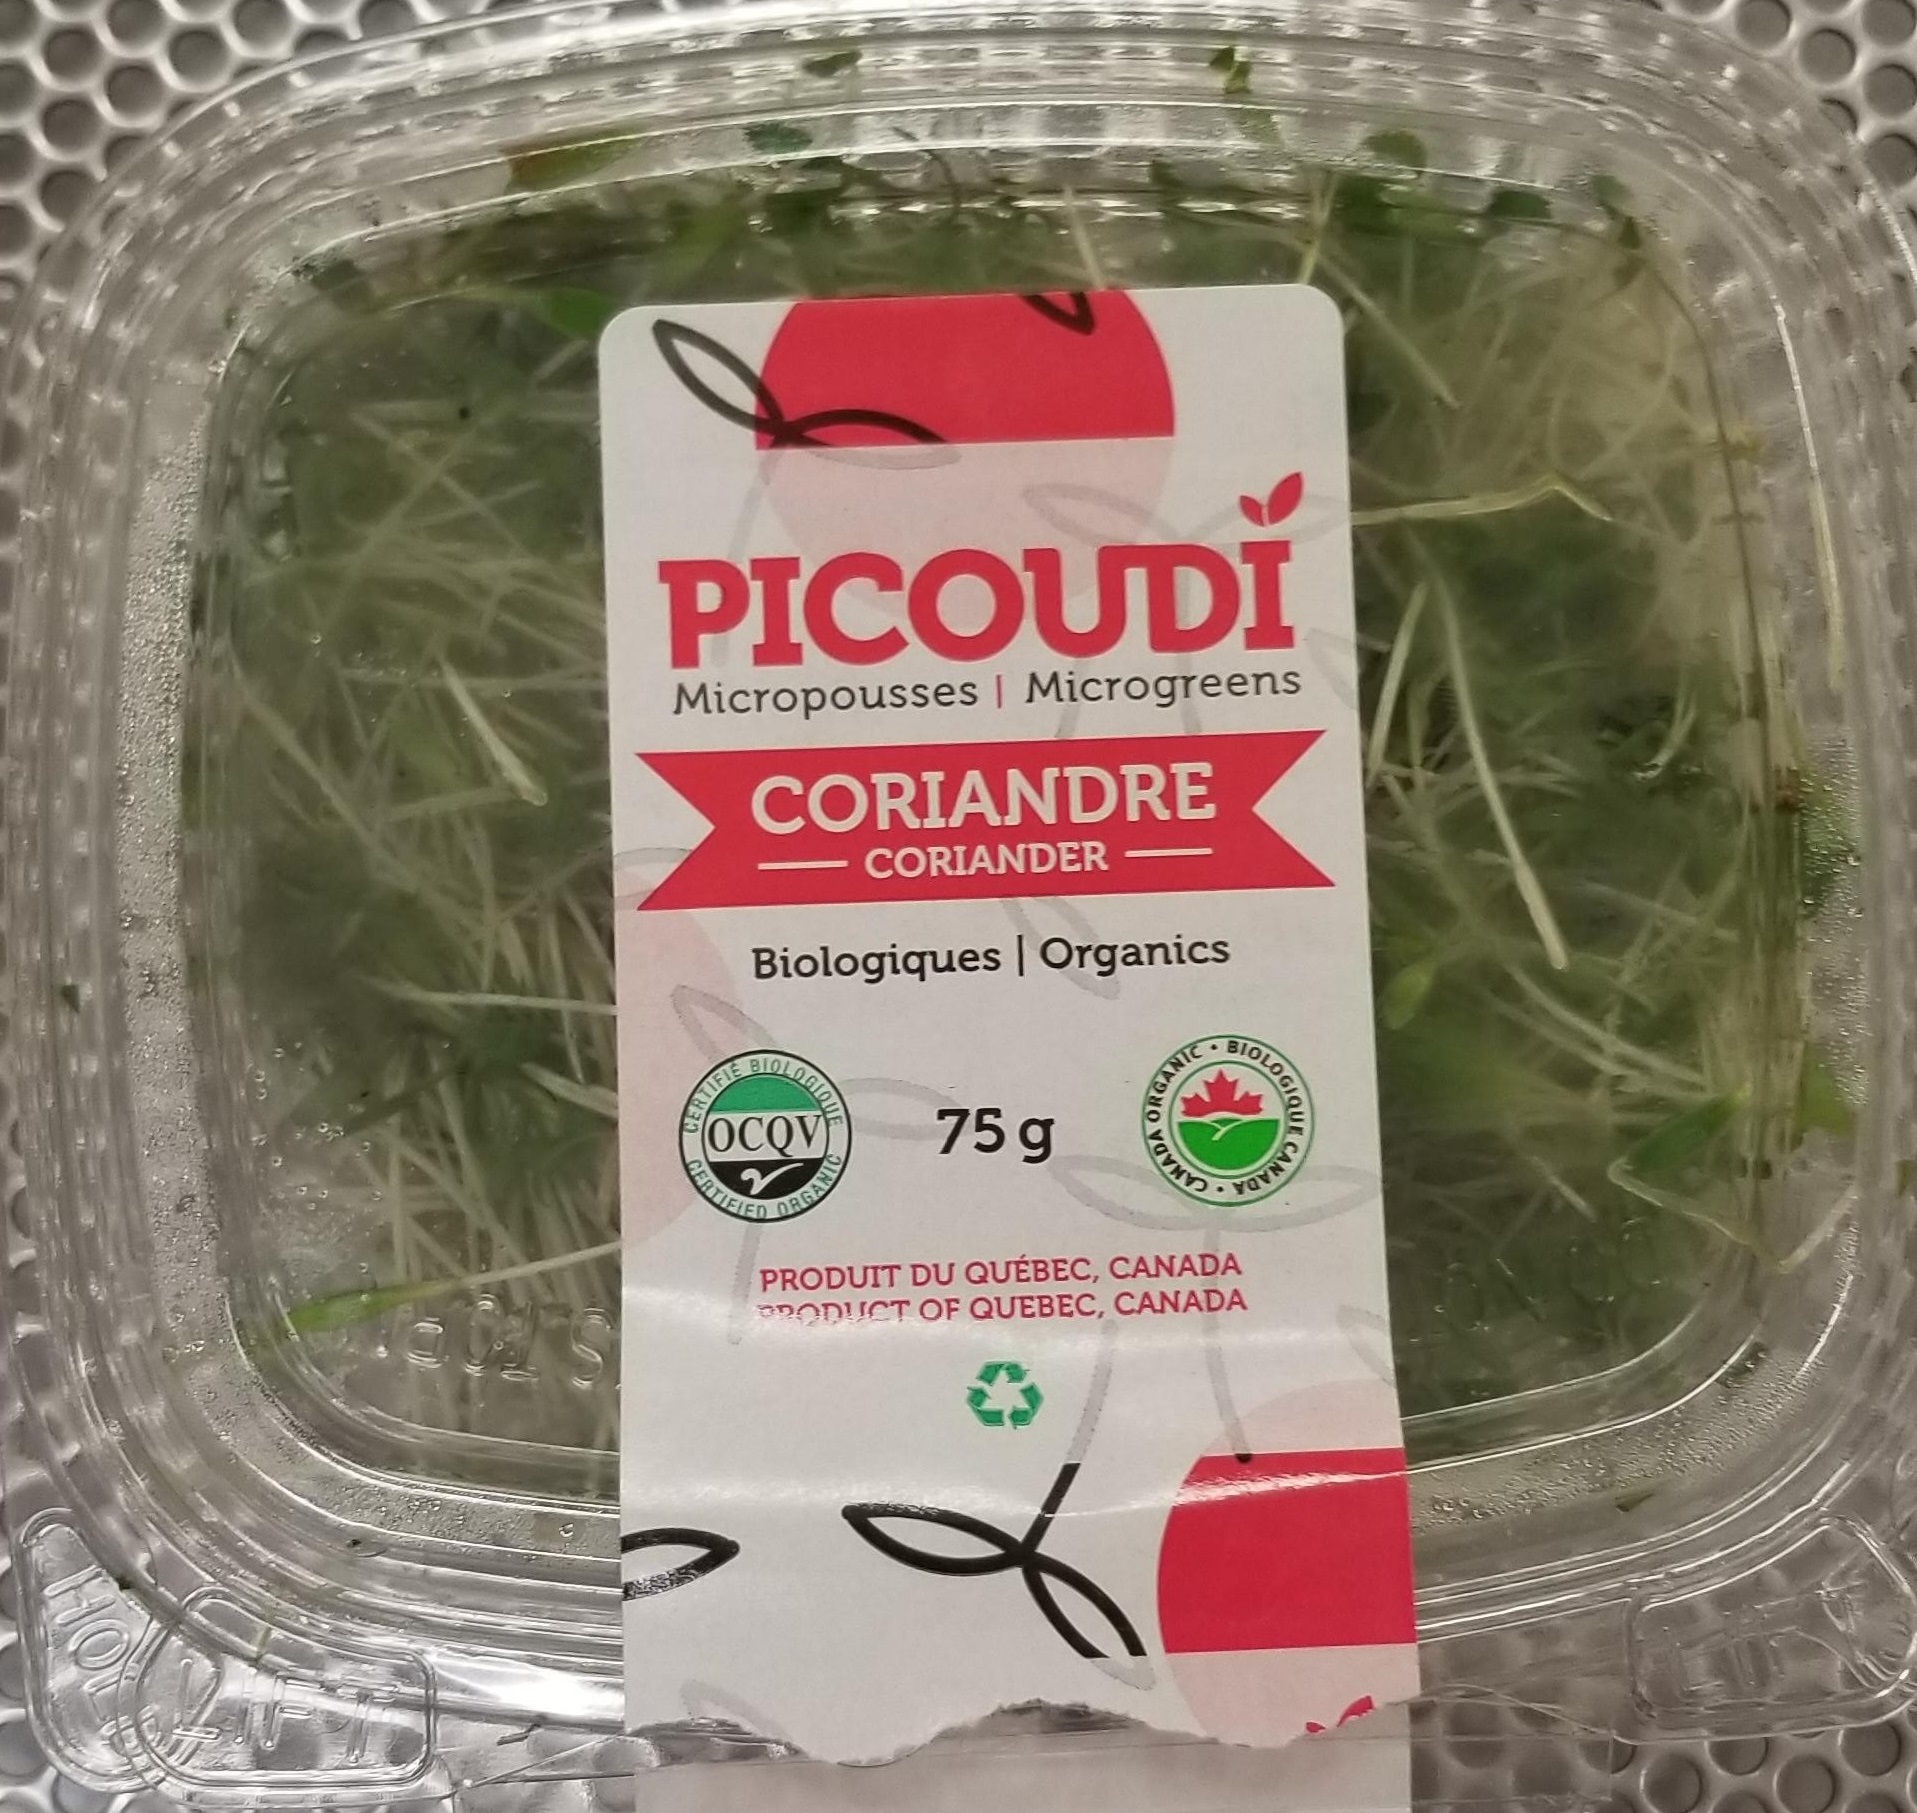 In Canada authorities recalled coriander microgreens sold by Les Jardins Picoudi